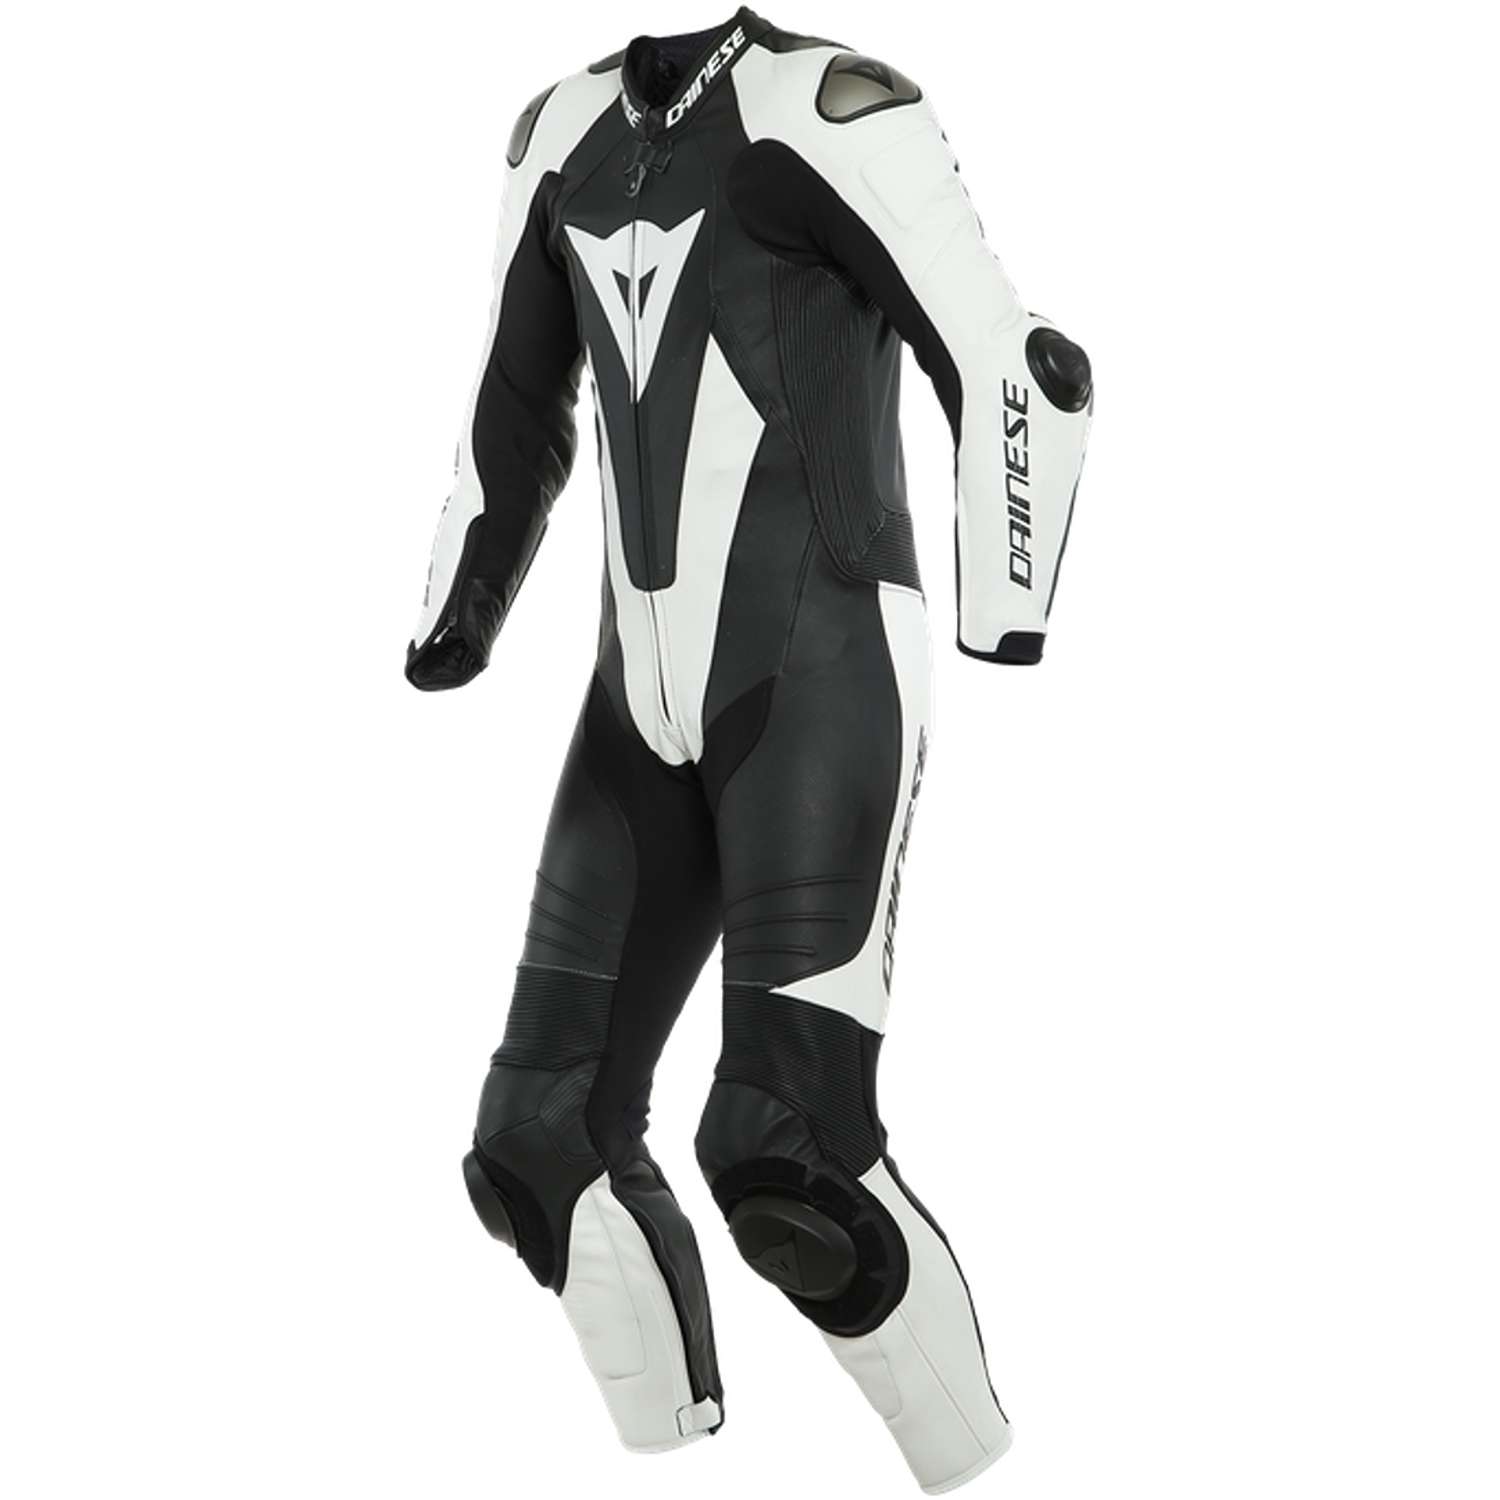 Image of Dainese Laguna Seca 5 1Pc Leather Suit Perf S/T Black White Größe 29